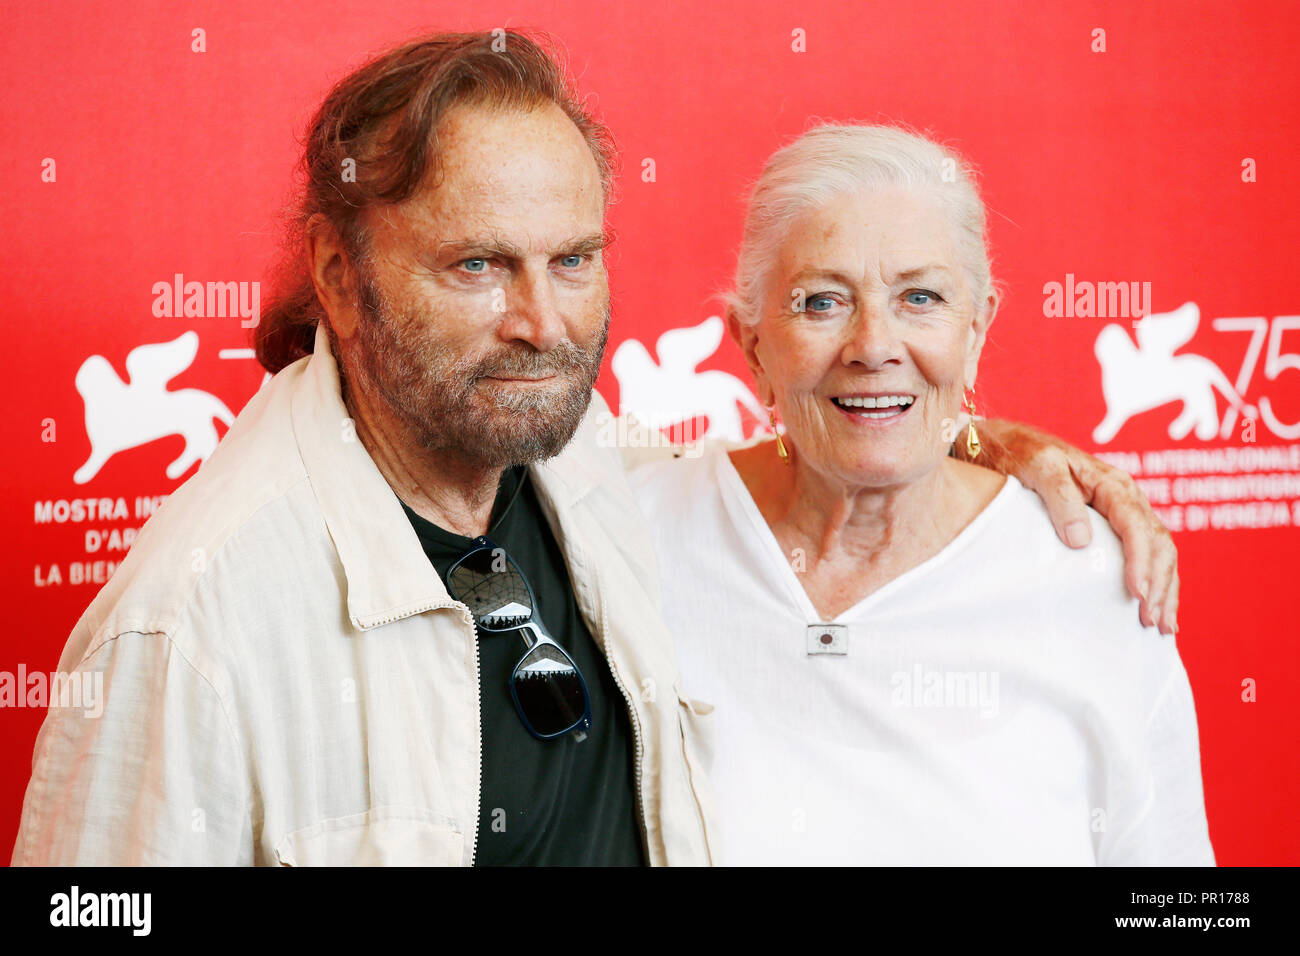 VENICE, ITALY - AUGUST 29: Franco Nero and Vanessa Redgrave attend a photo-call for the Lifetime Achievement Award during the 75th Venice Film Festiva Stock Photo